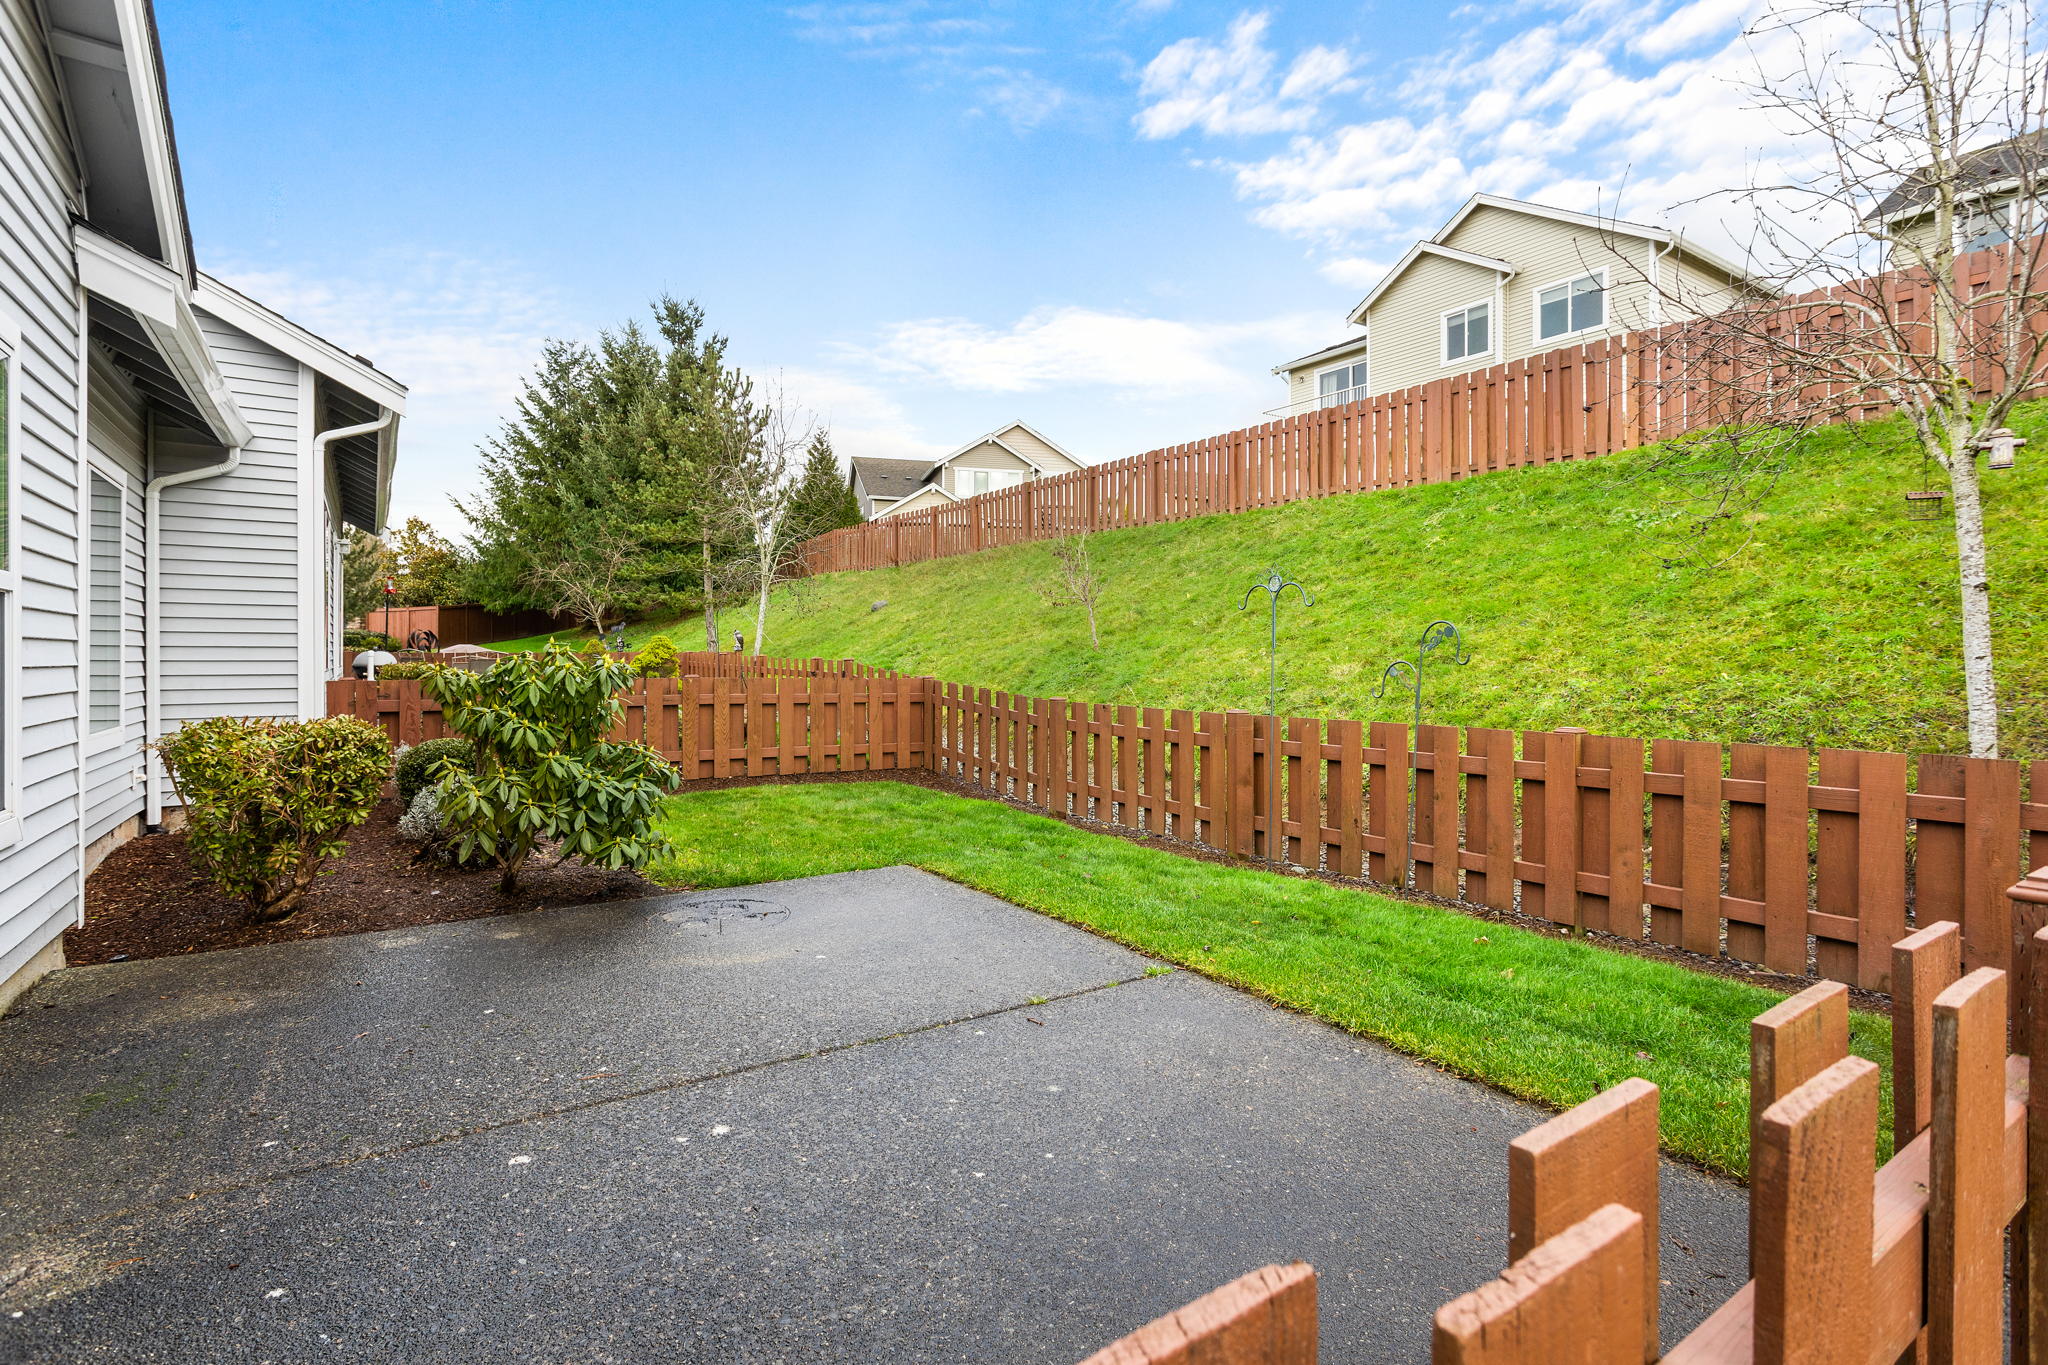 Private fenced in backyard space!